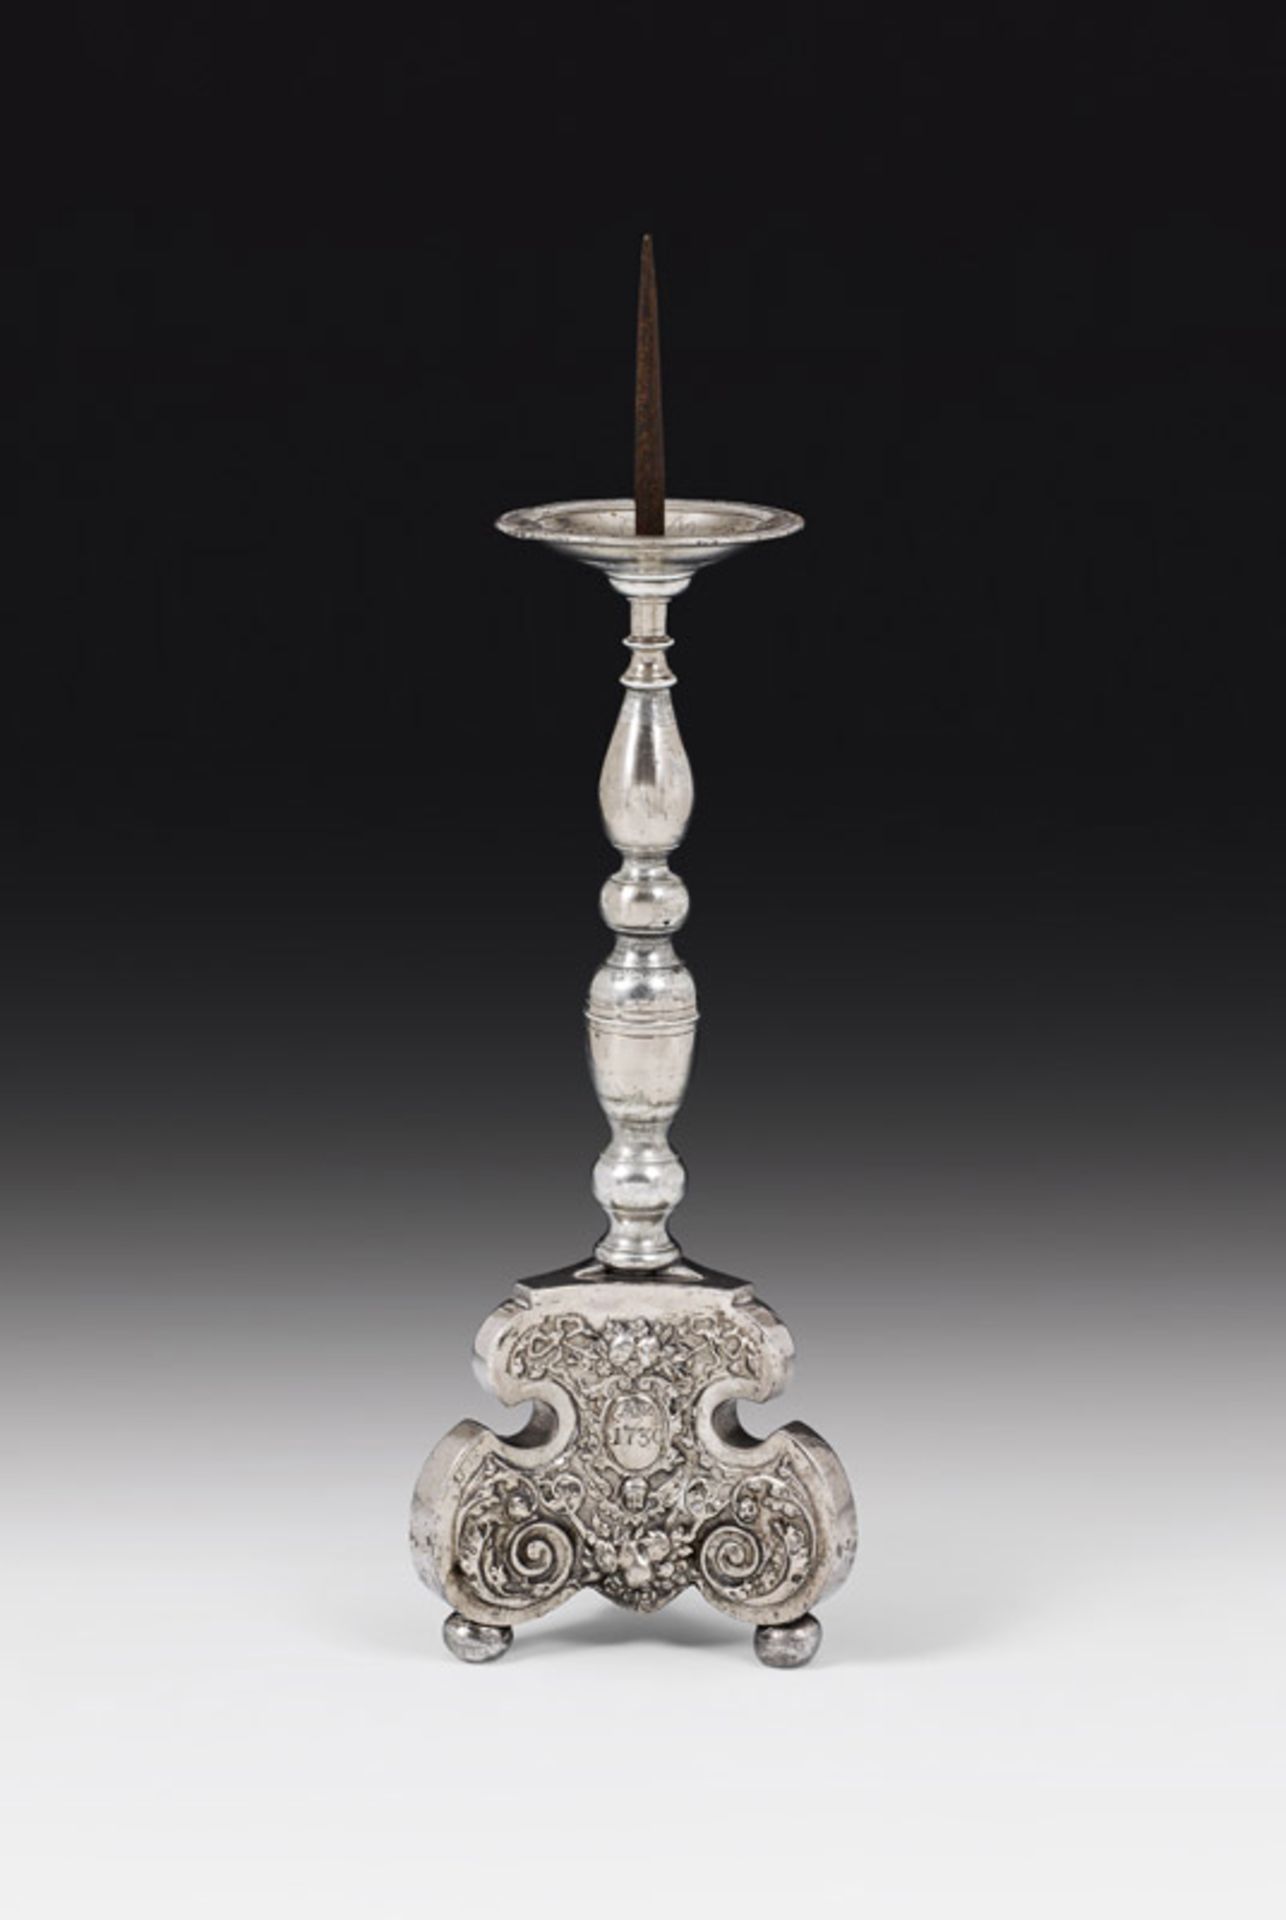 Candlestick "Baker", German, dat. 1730 pewter, silvered; h. 48 cm (incl. Thorn)private collection,